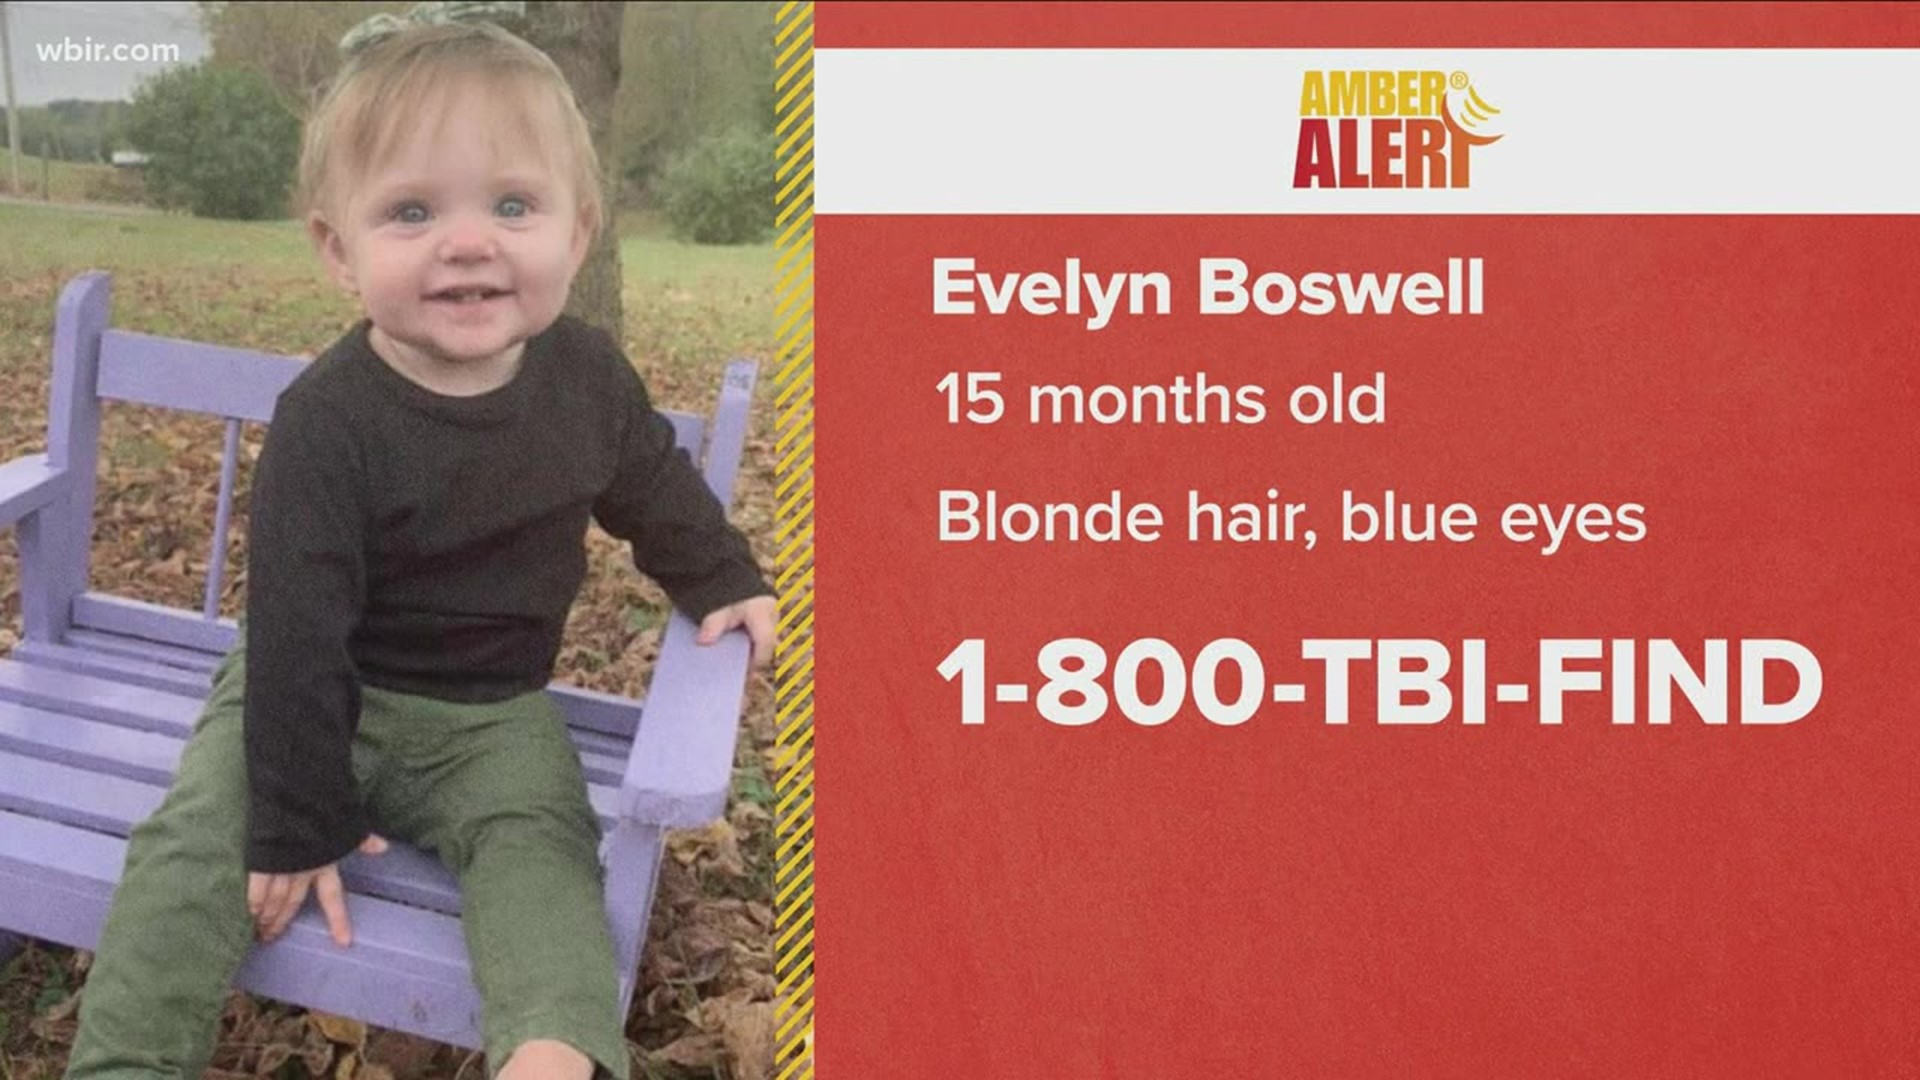 Tennessee lawmakers weigh in on 'Evelyn's Law' petition - Courtesy WBIR